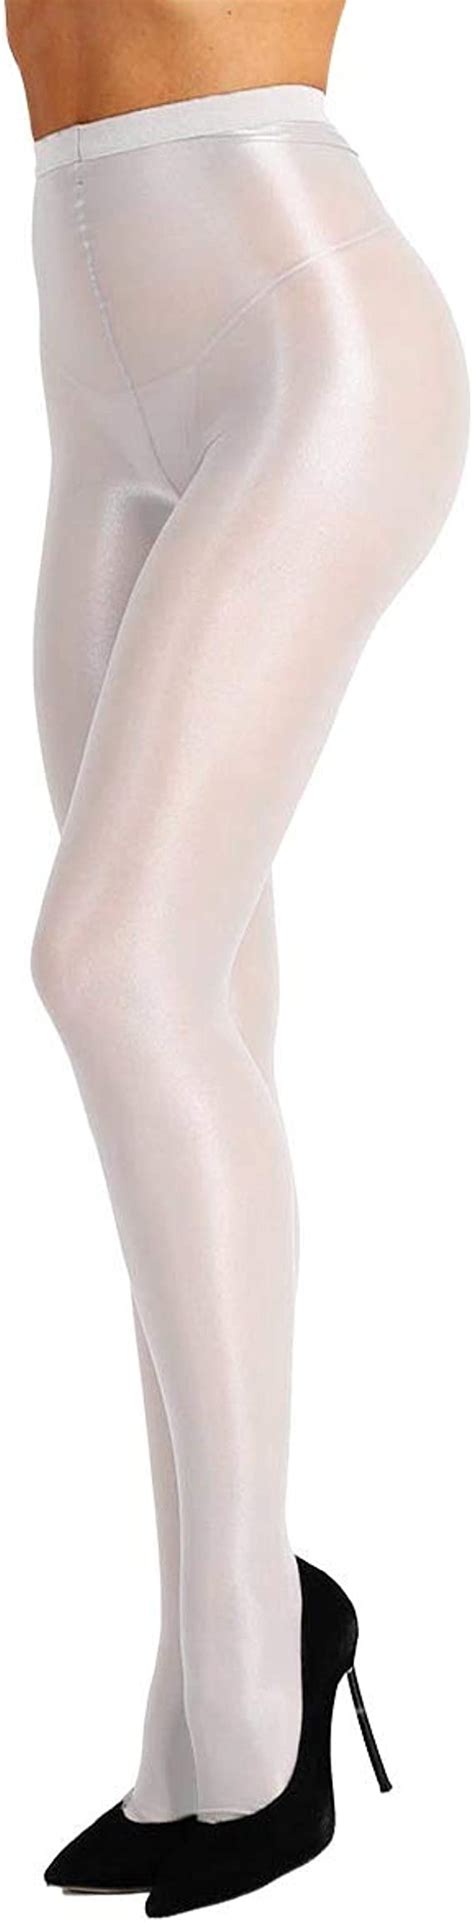 Agoky Women S Sheer Semi Opaque Footed Pantyhose Tights High Waist Shimmery Silky Hosiery